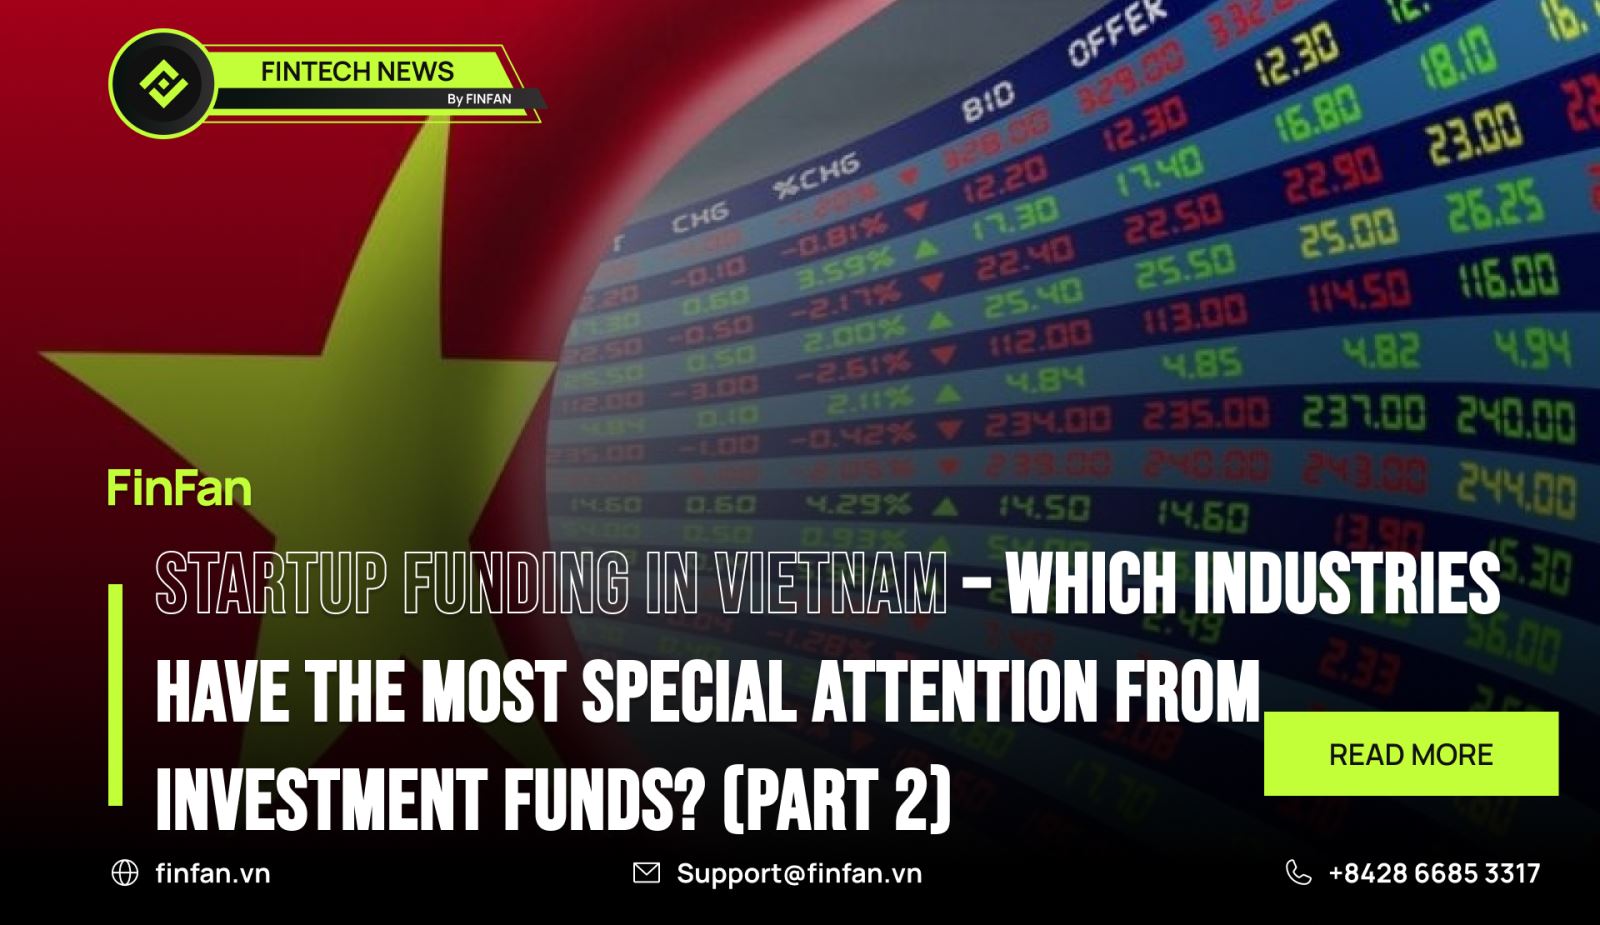 Startup funding in Vietnam – which industries have the most special attention from investment funds (part 2)Startup funding in Vietnam – which industries have the most special attention from investment funds (part 2)